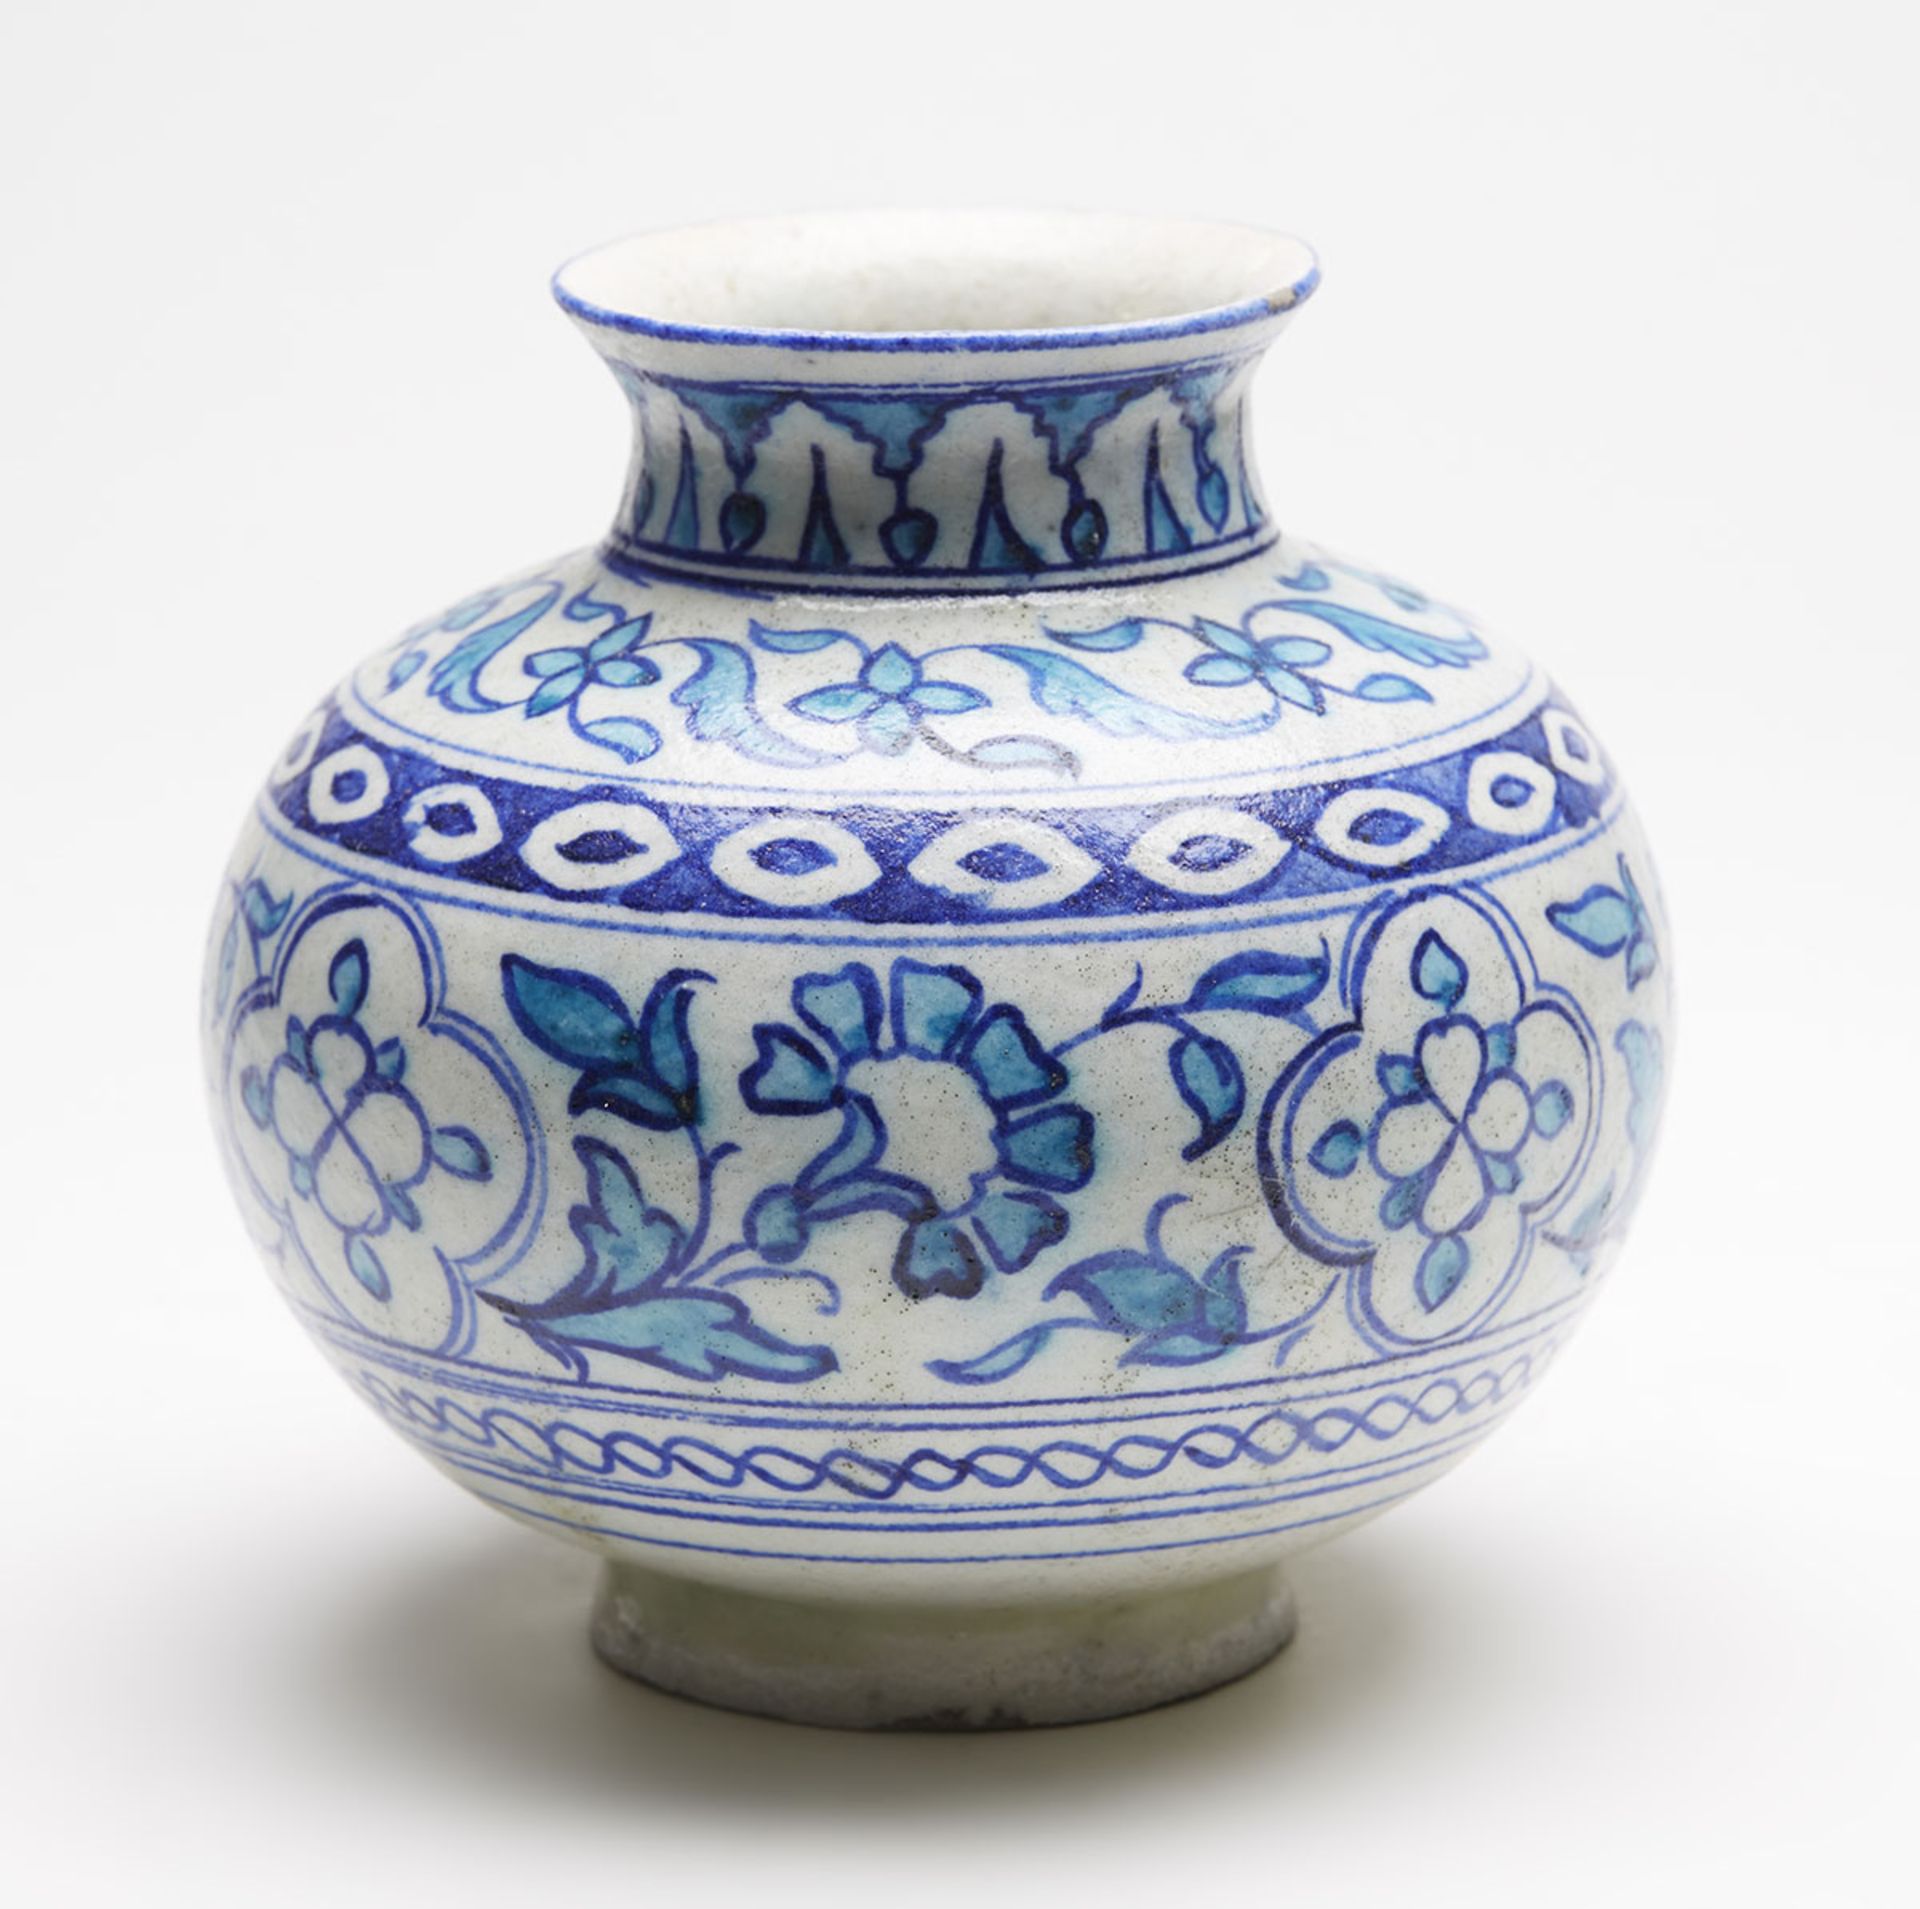 ANTIQUE MIDDLE EASTERN/INDIAN BLUE & WHITE VASE 19TH C.   DIMENSIONS   Height 13,5cm, Diameter 14, - Image 4 of 9